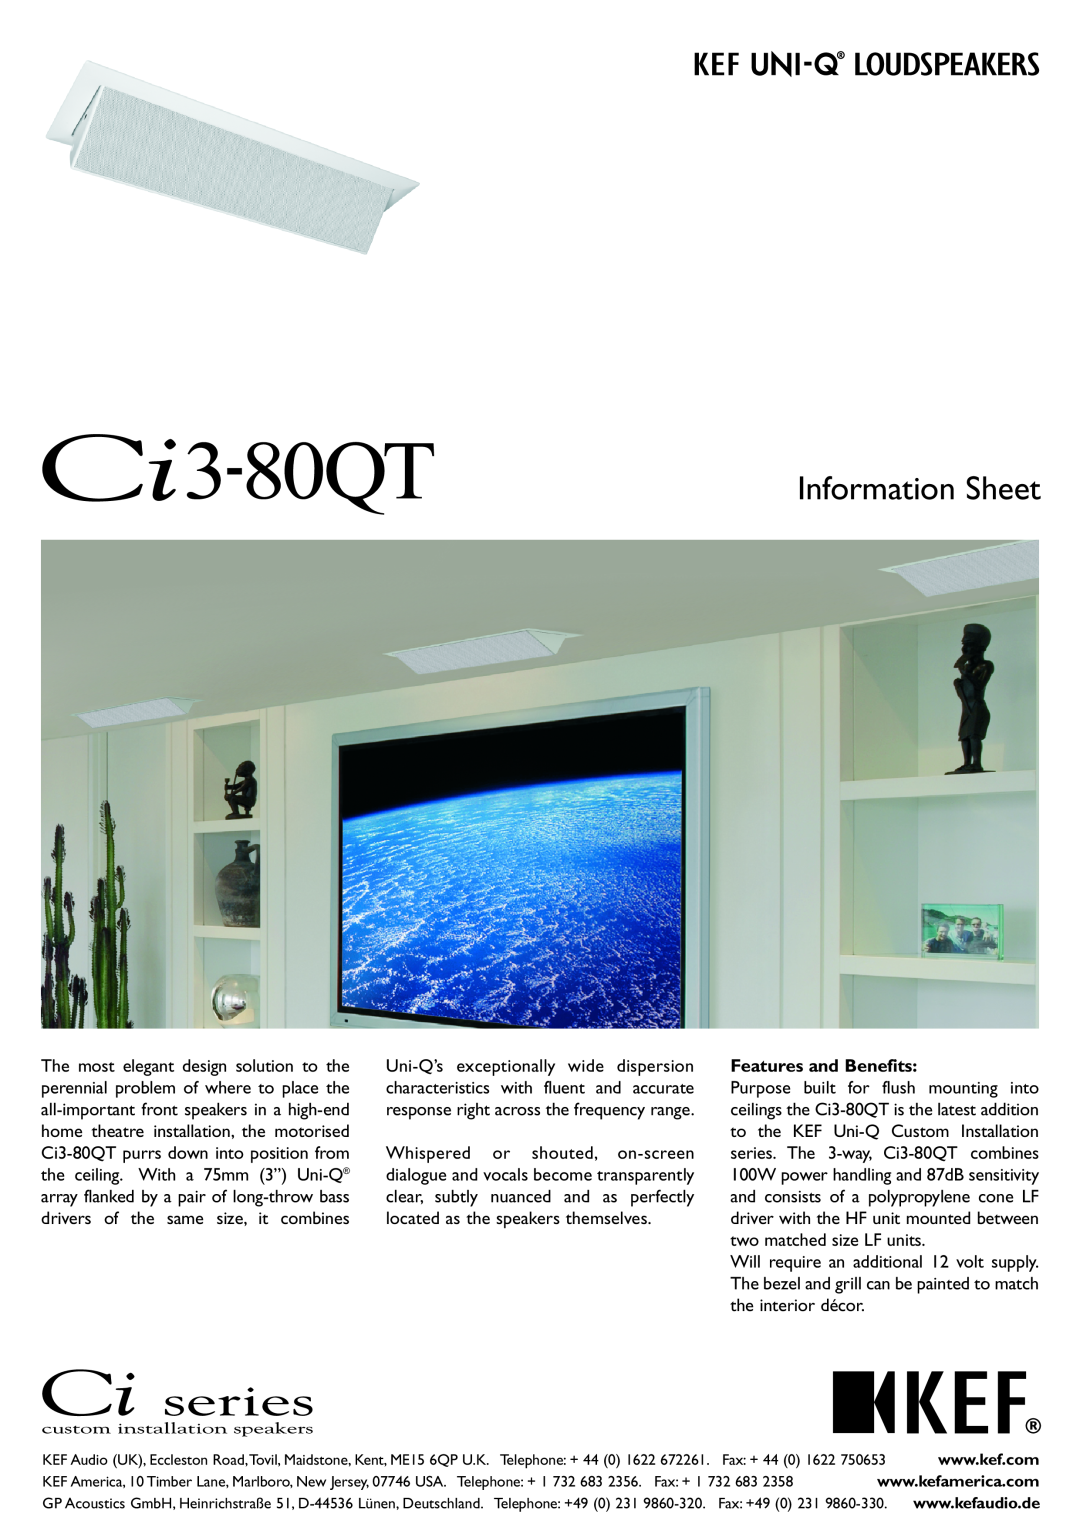 KEF Audio Ci3-80QT manual Features and Benefits, Information Sheet 